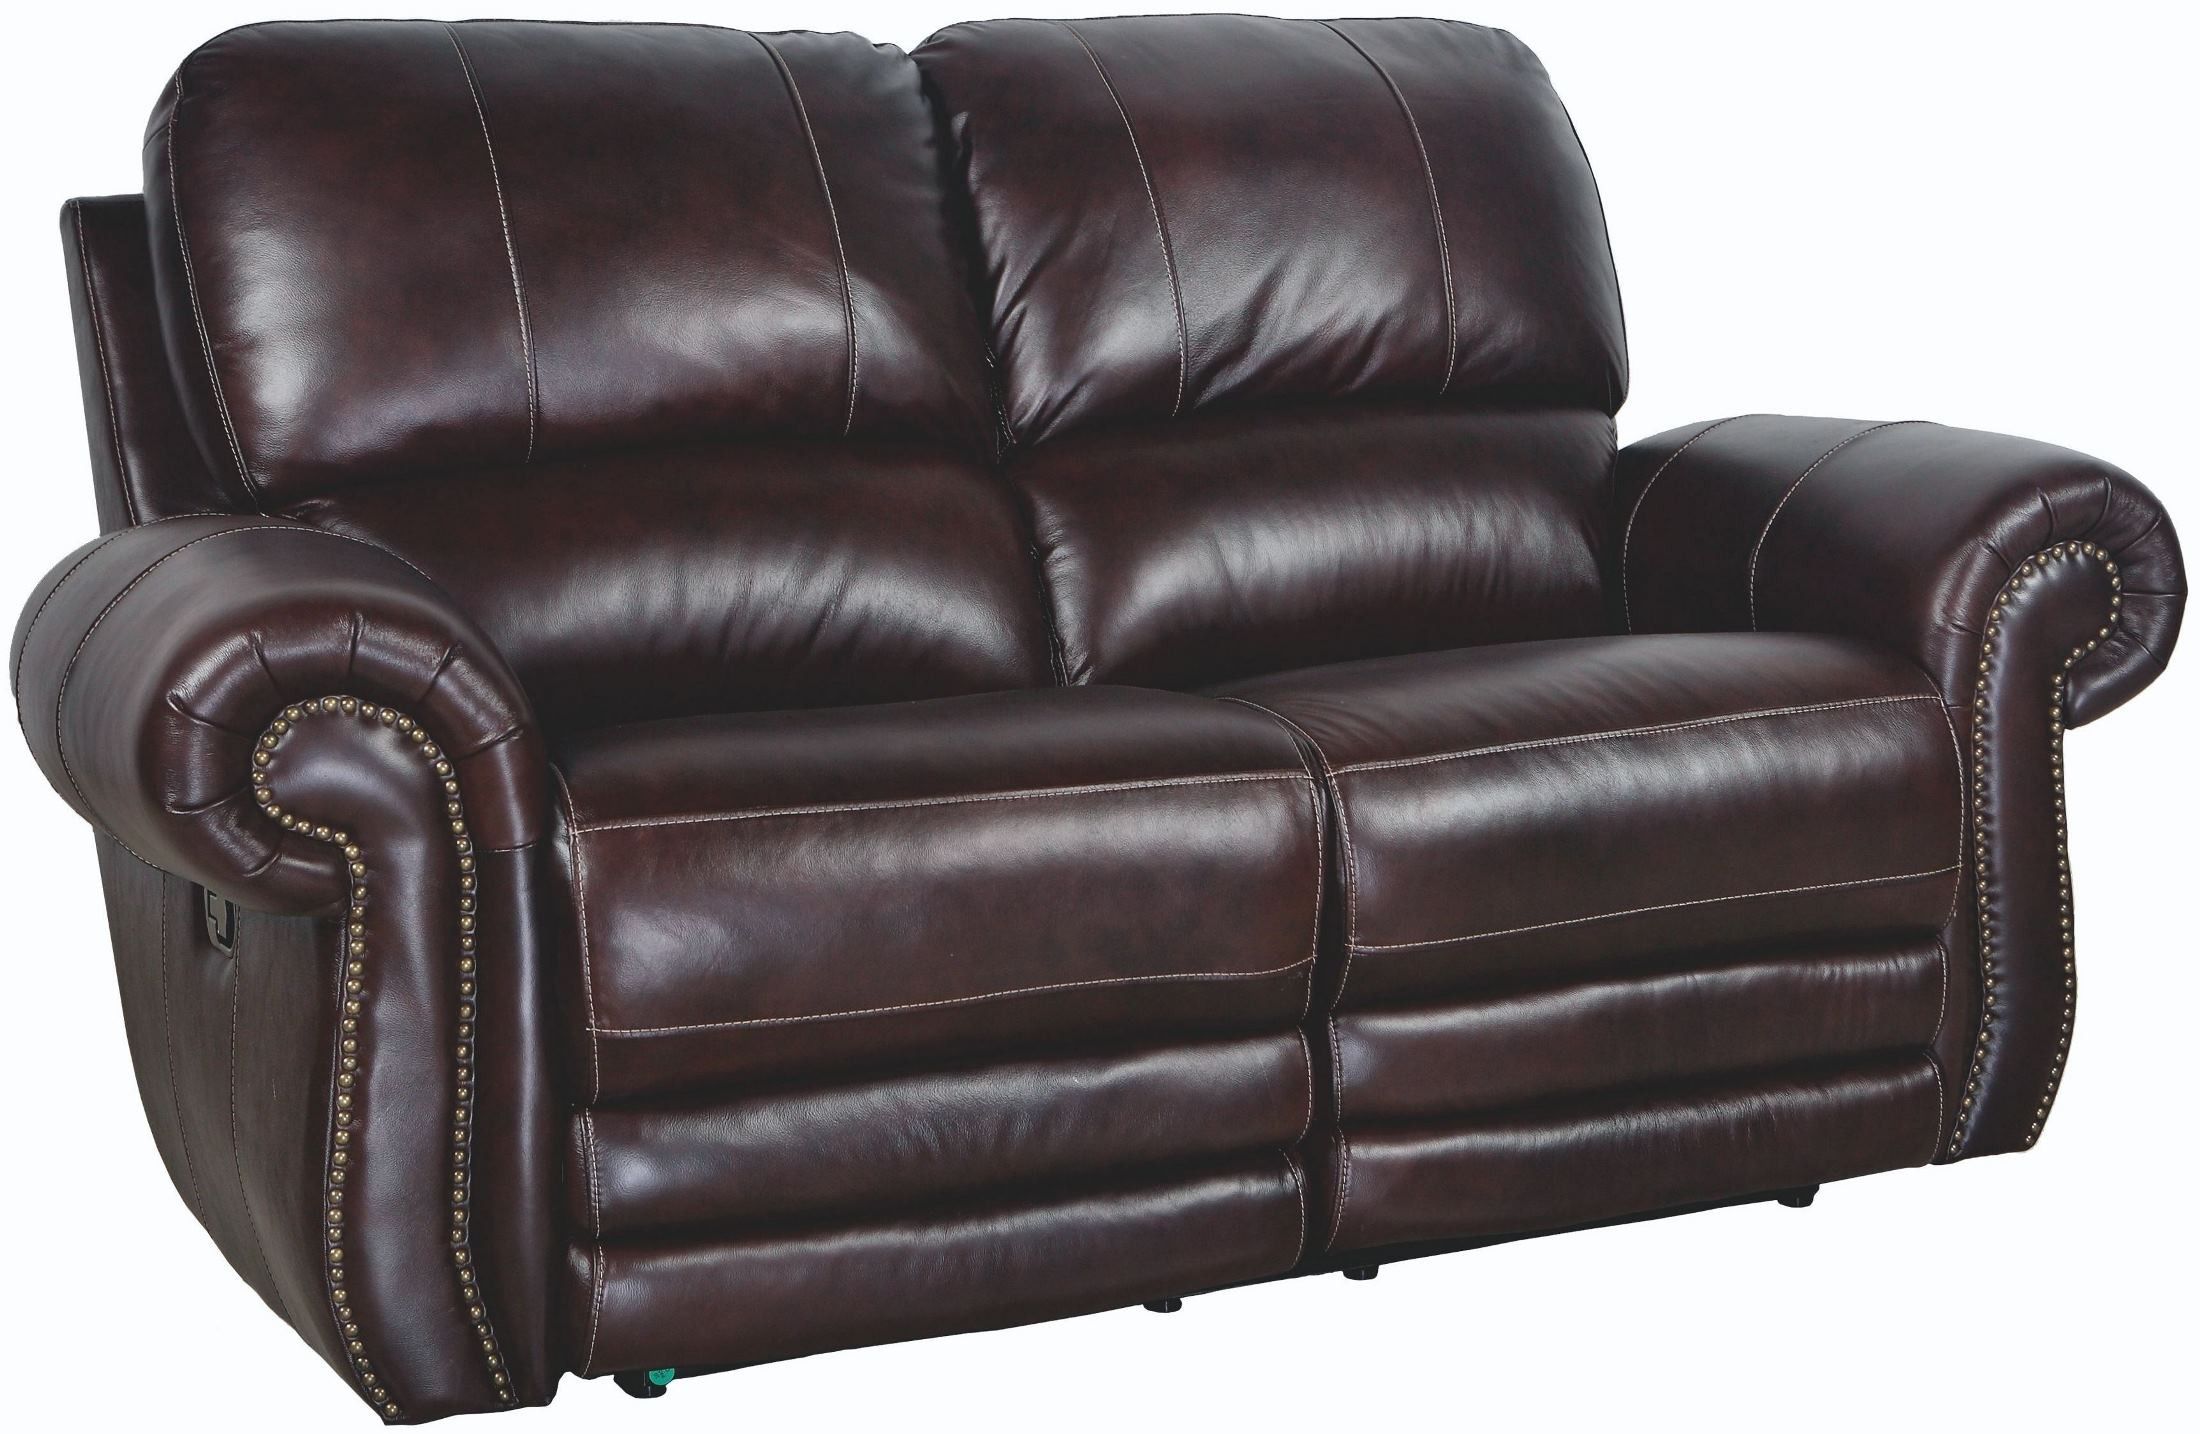 Rossi Dark Brown Power Reclining Loveseat From New Classic In Expedition Brown Power Reclining Sofas (View 1 of 15)